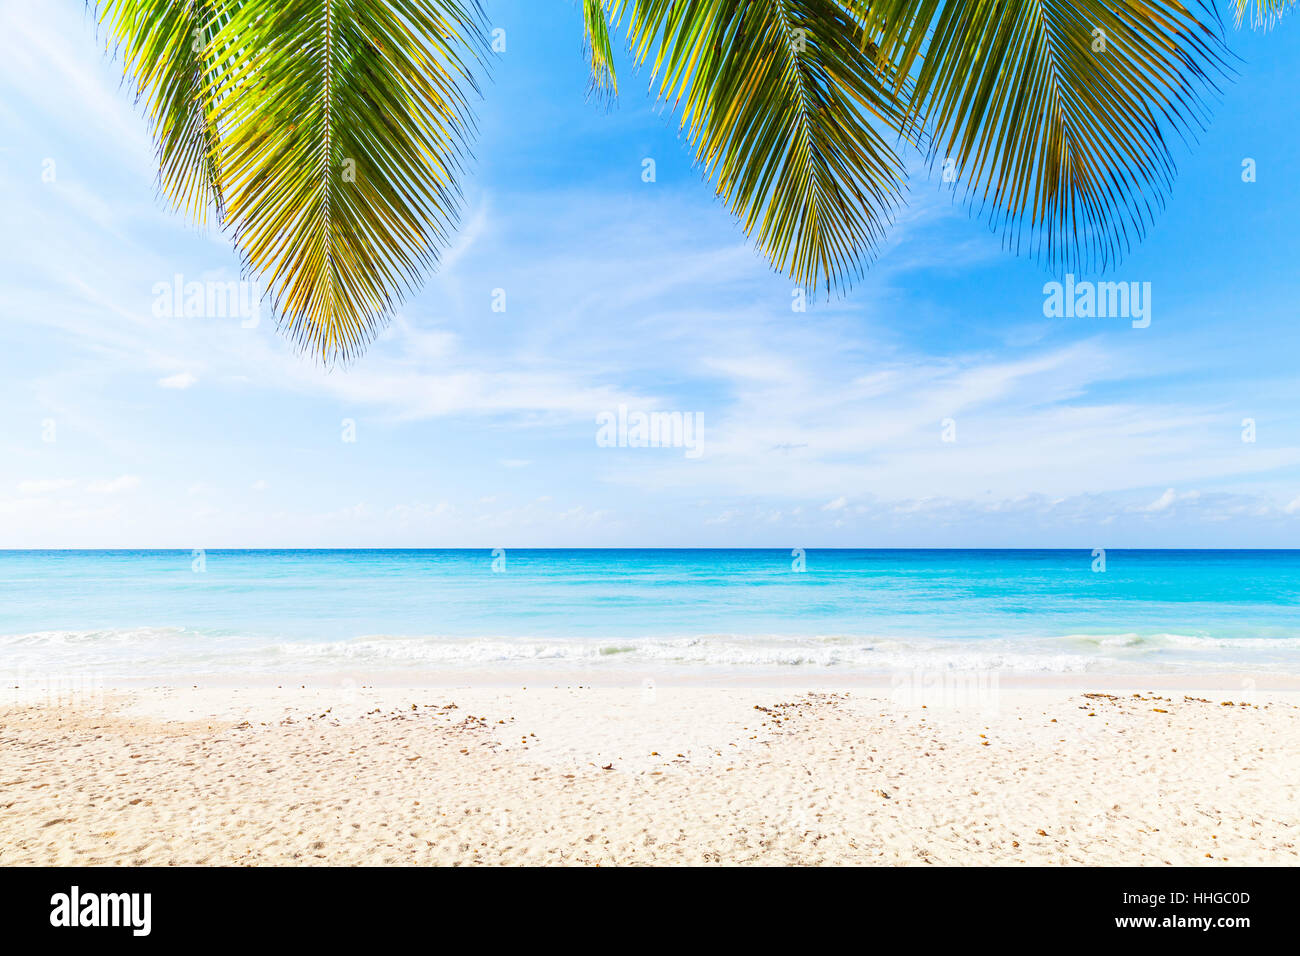 Tropical beach background, white sand, azure water and palm tree branches over blue sky.  Caribbean Sea coast, Dominican republic, Saona island Stock Photo